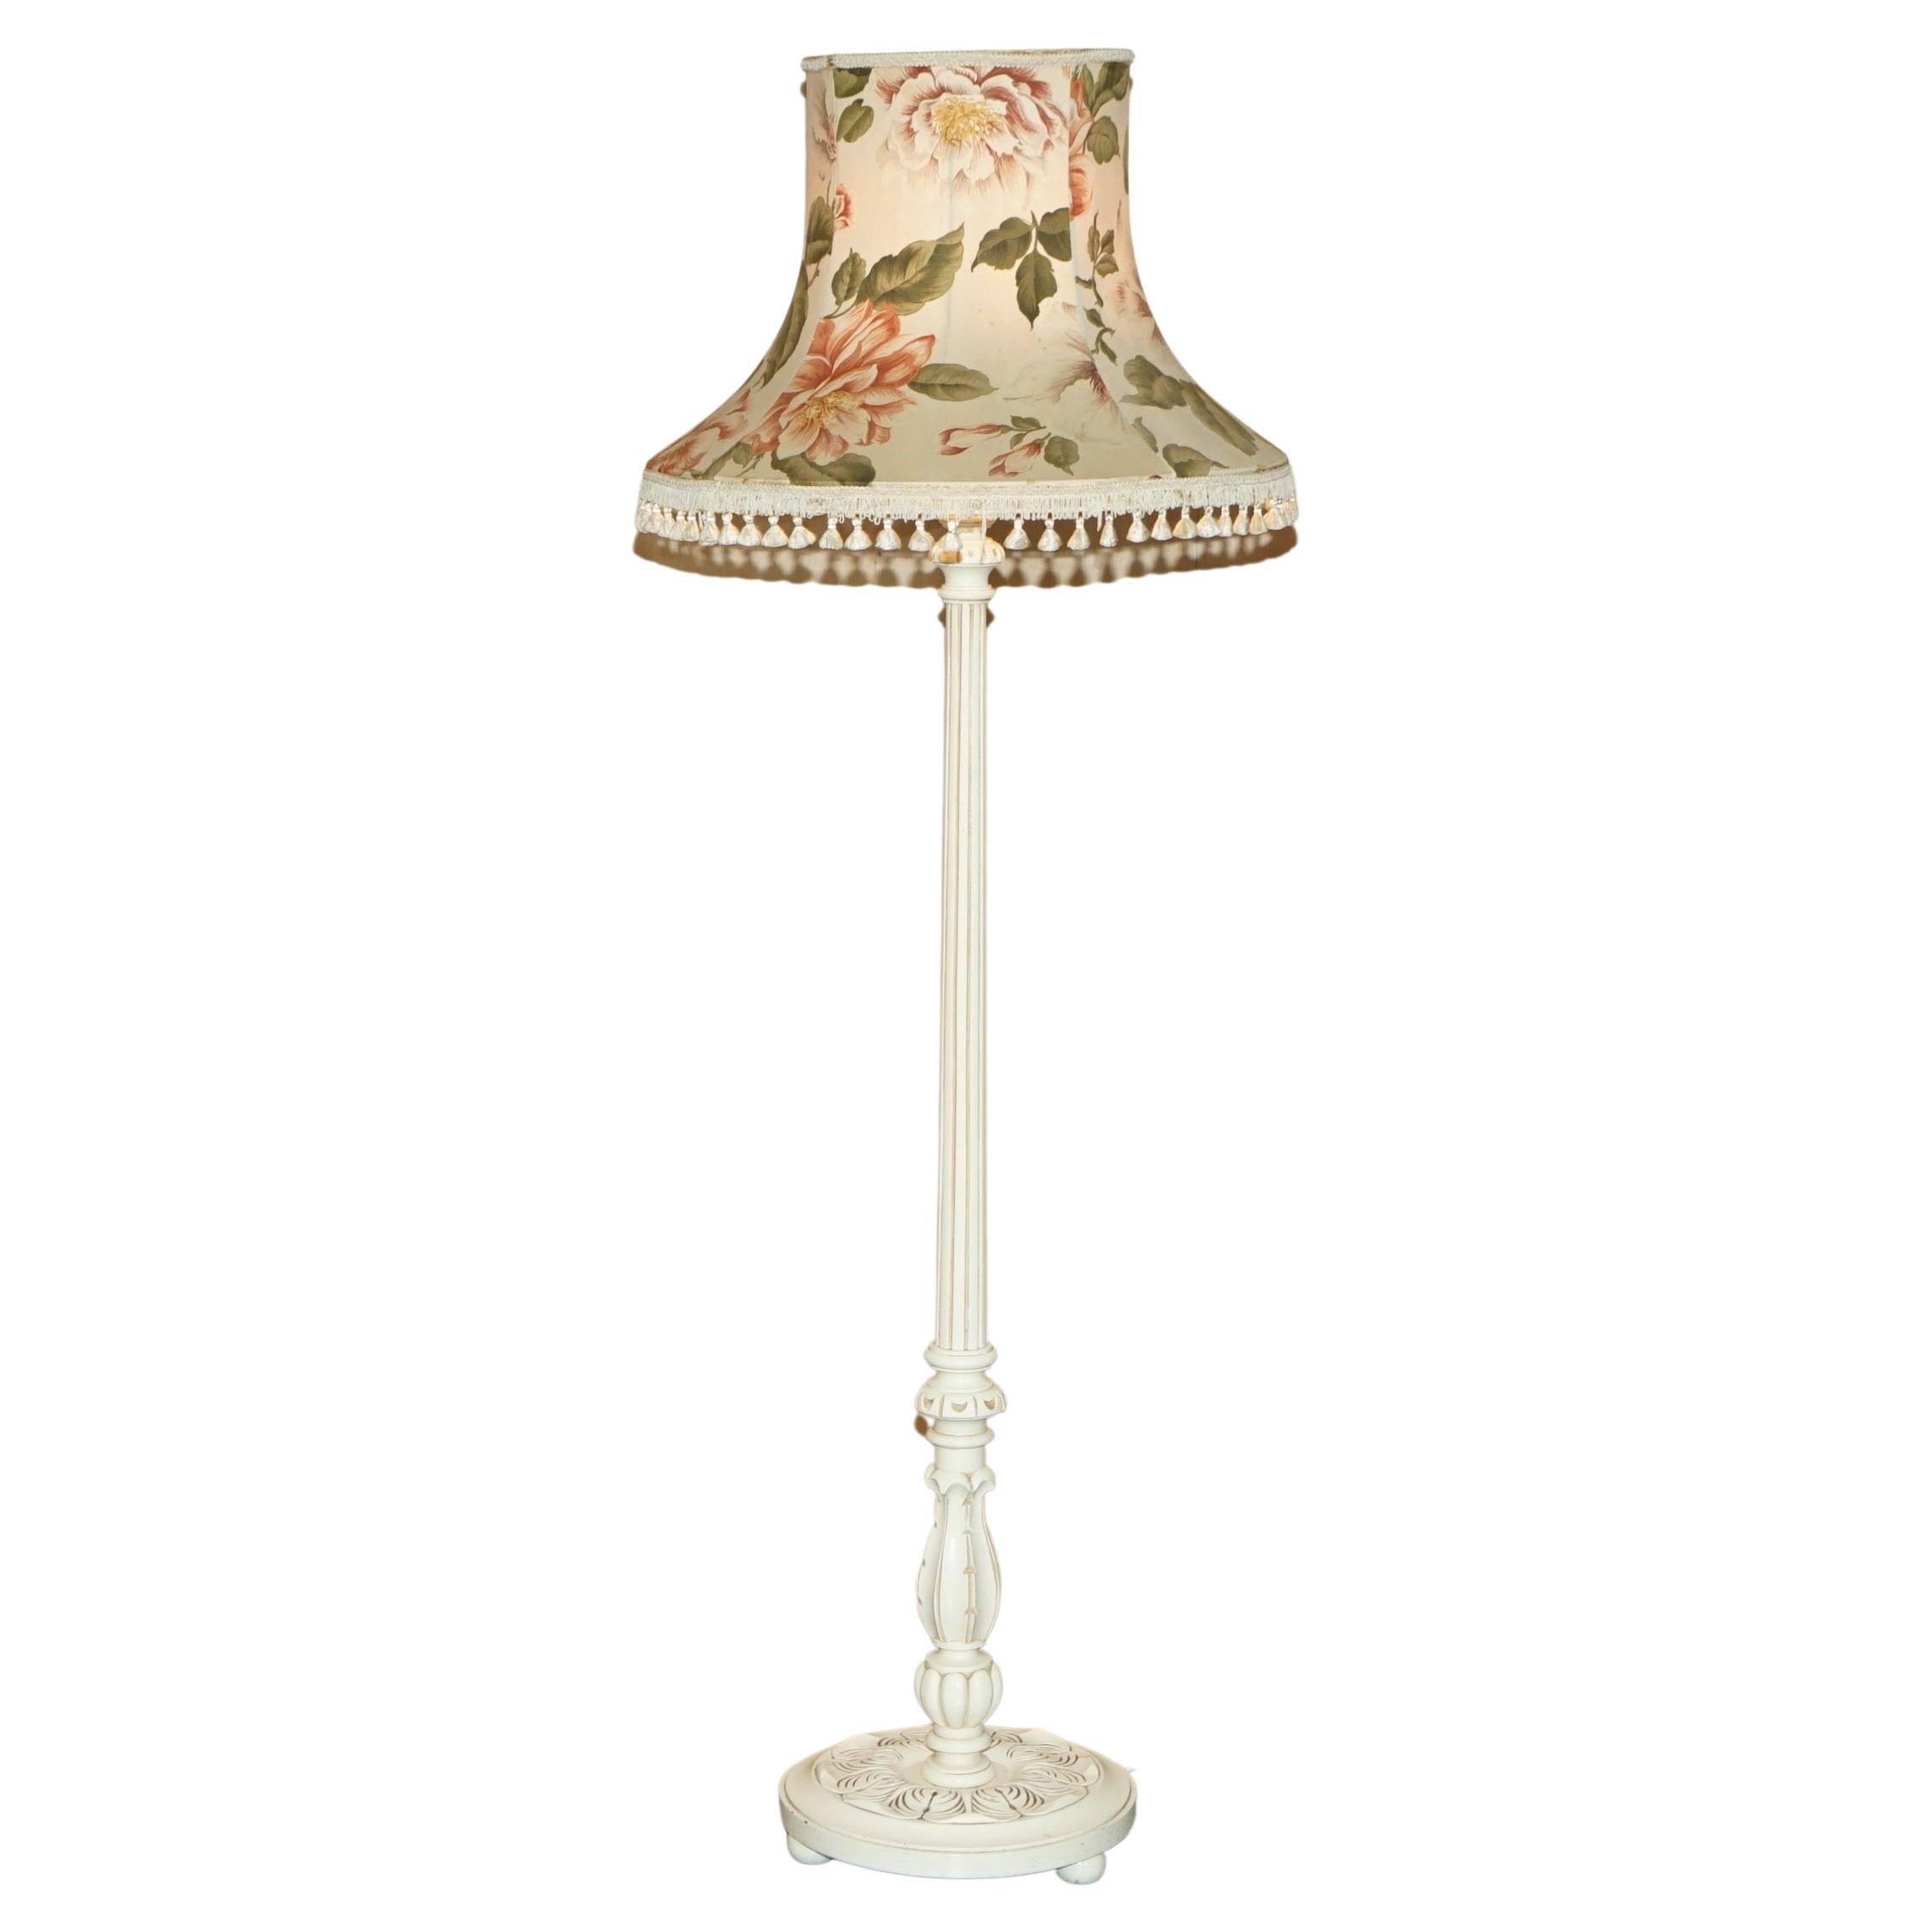 FLOOR STANDING CARVED SHABBY CHIC PAiNTED LAMP WITH VINTAGE FLORAL SHADE For Sale